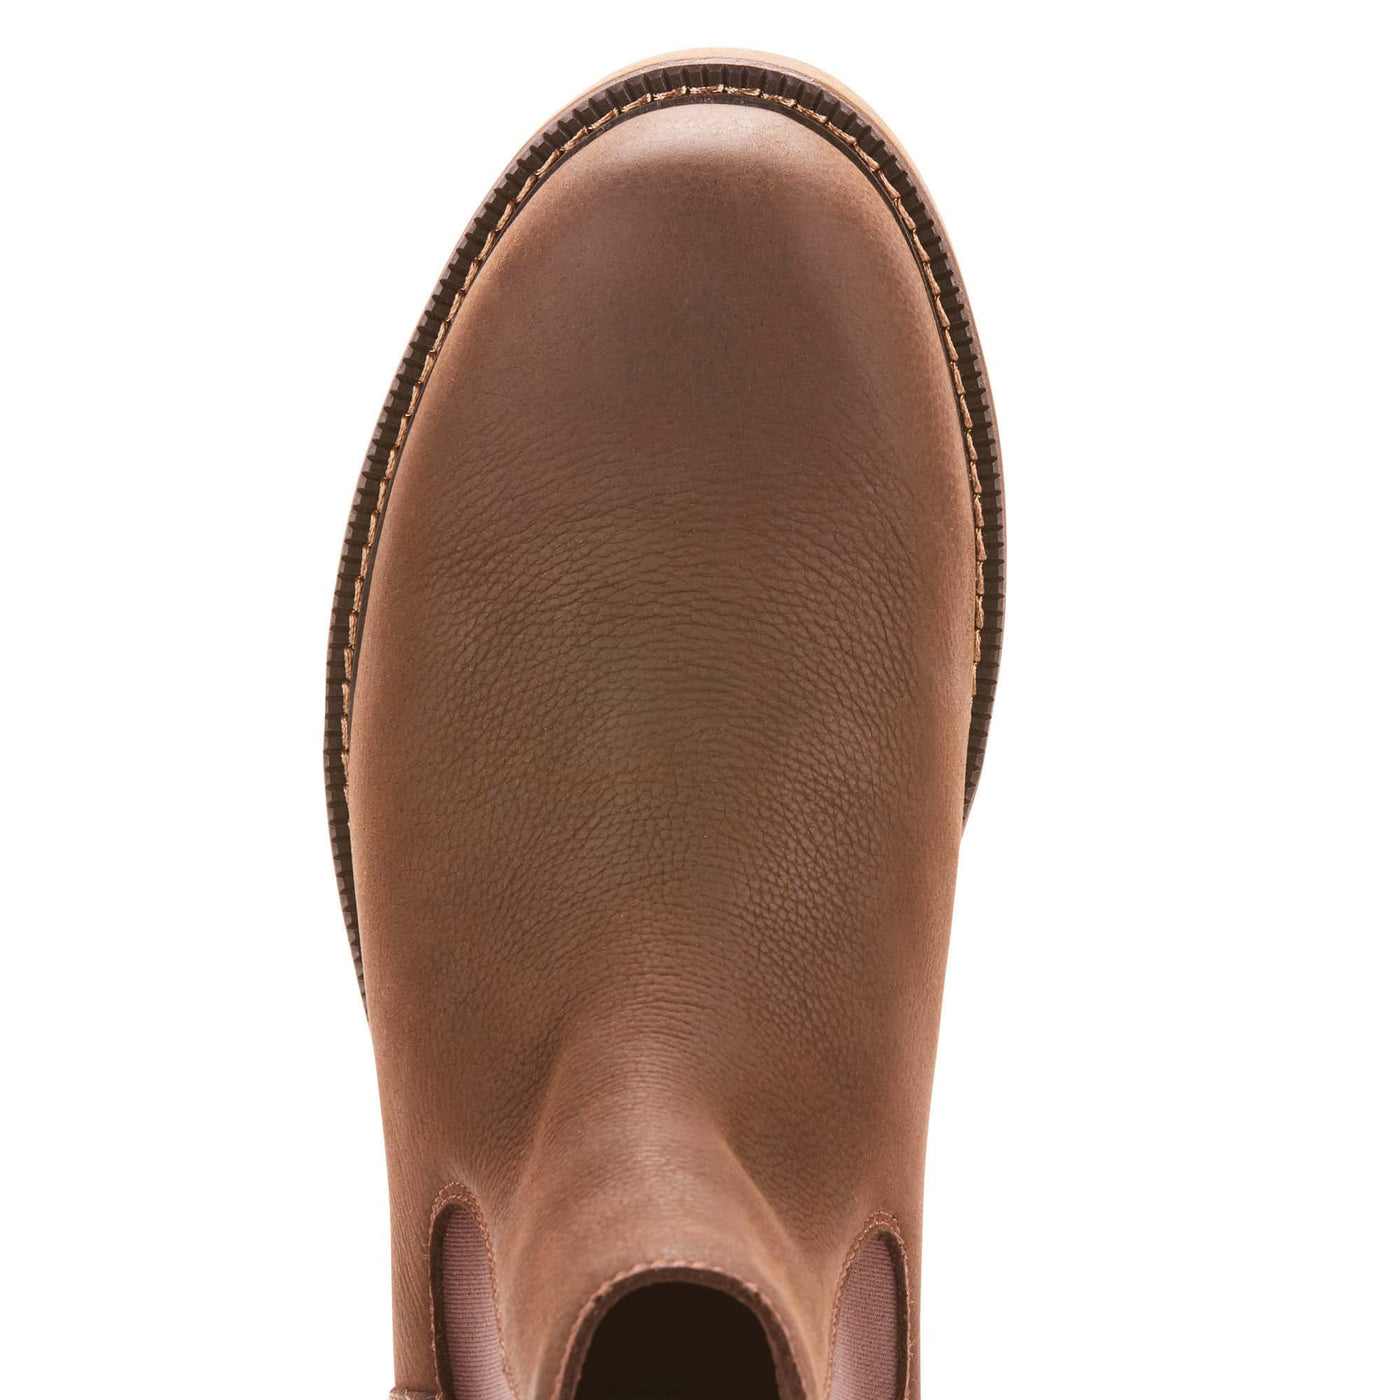 Ariat | Men's Wexford H2O Java - Outback Traders Australia